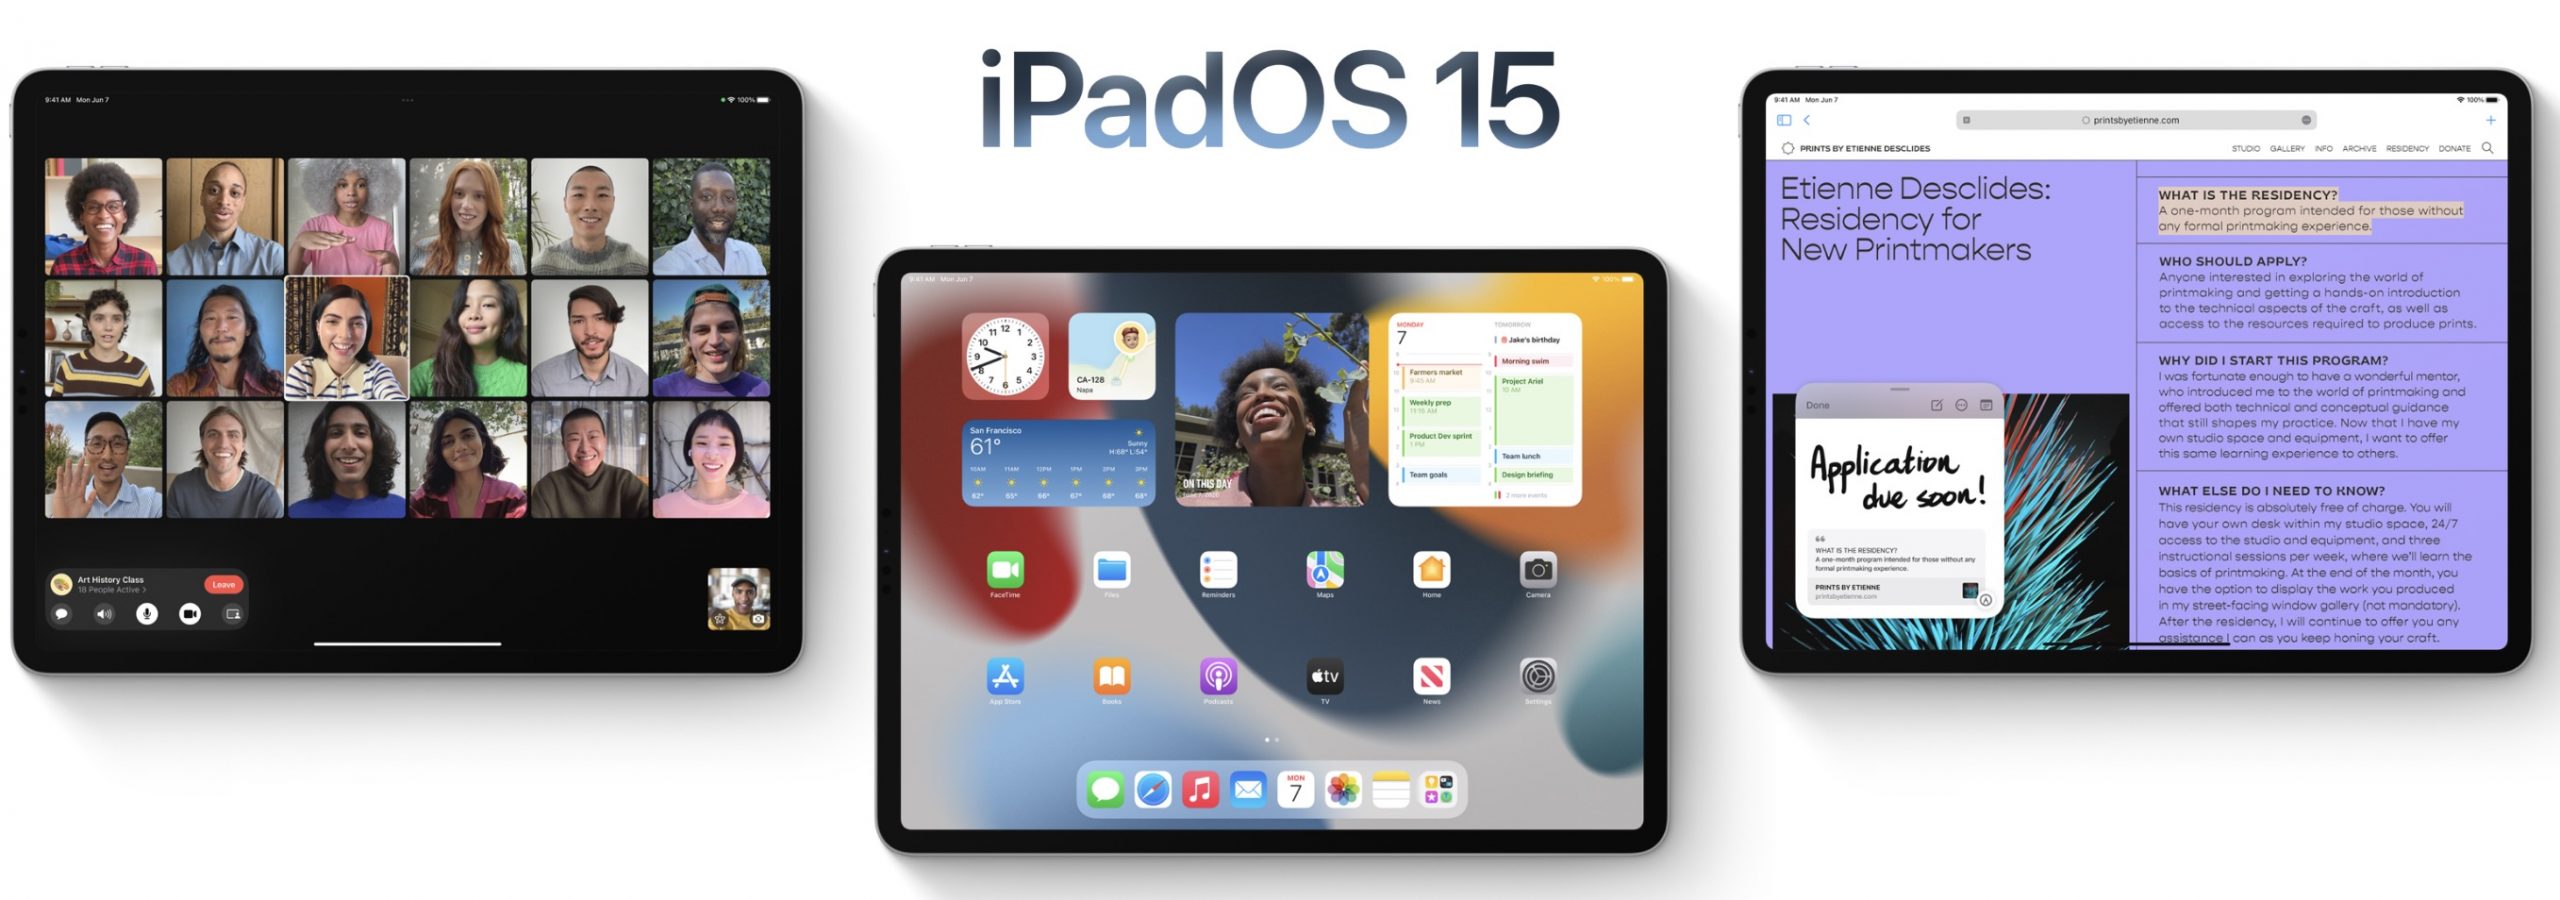 Which iPad Models Support iPadOS 15?